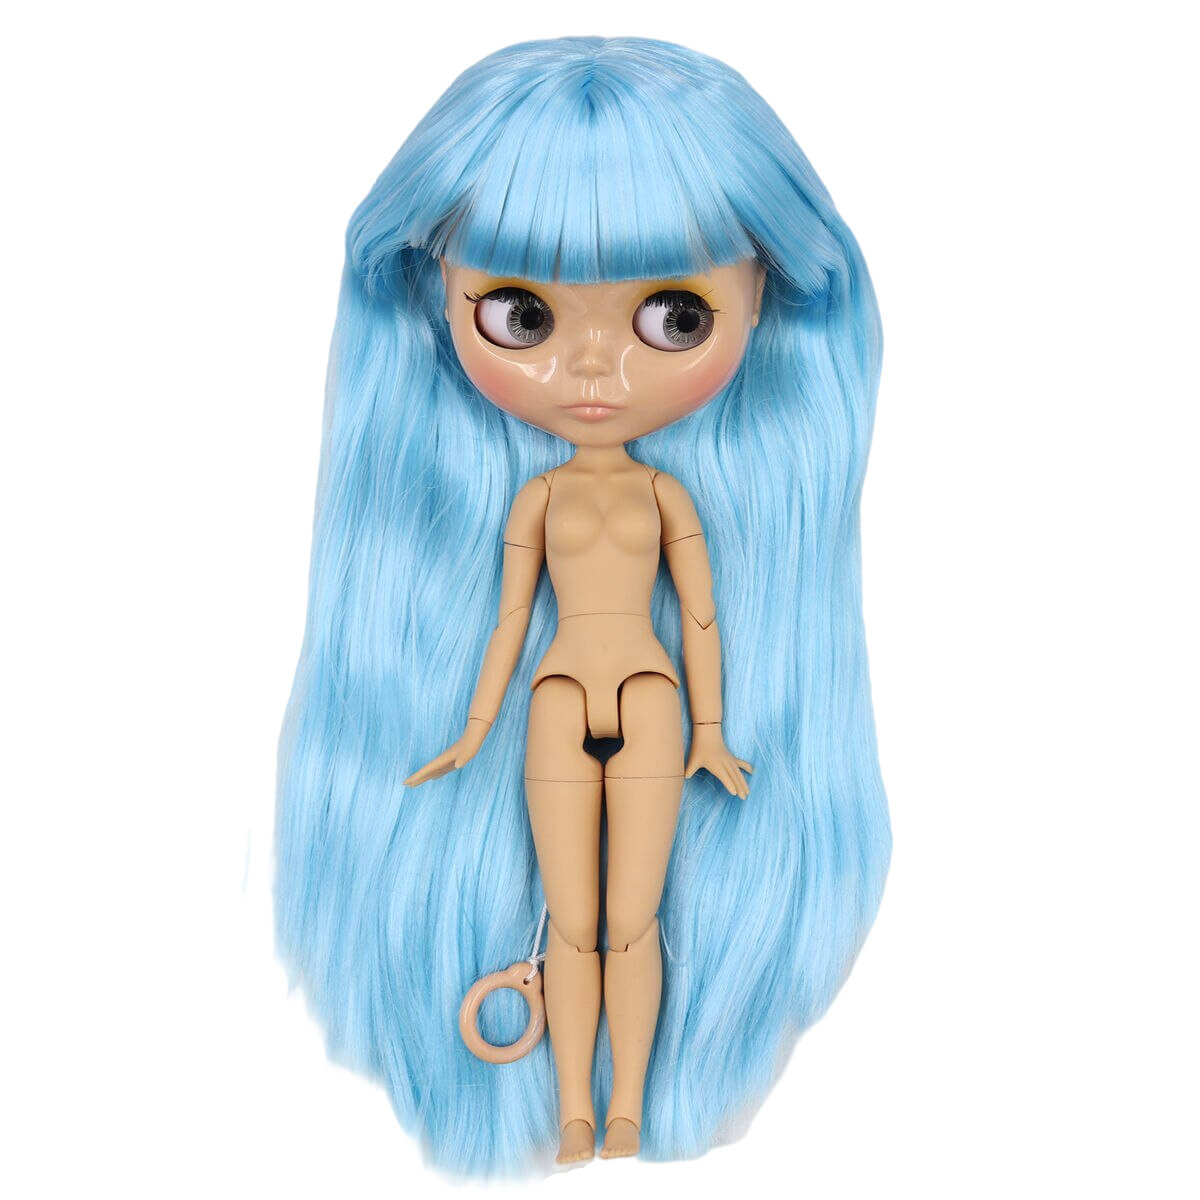 Neo Blythe Doll with Blue Hair, Tan Skin, Shiny Face & Jointed Body Blue Hair Nude Blythe Doll Shiny Face Nude Blythe Doll Tan Skin Nude Blythe Doll